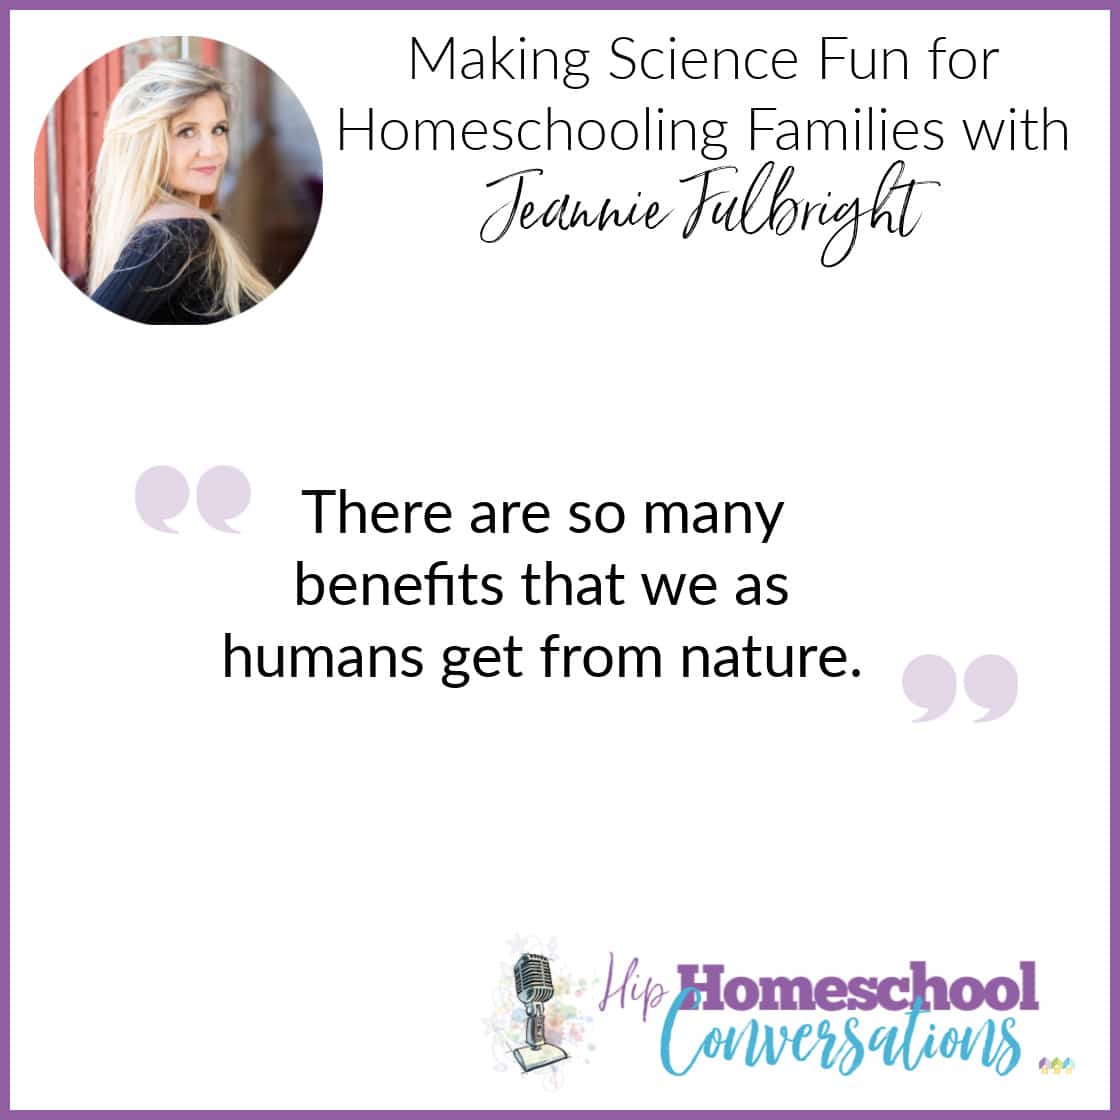 Whether you’re a new or experienced homeschooler, in Trish’s interview with Jeannie Fulbright you’ll find tons of helpful information to increase the joy and wonder of learning science and history at home.